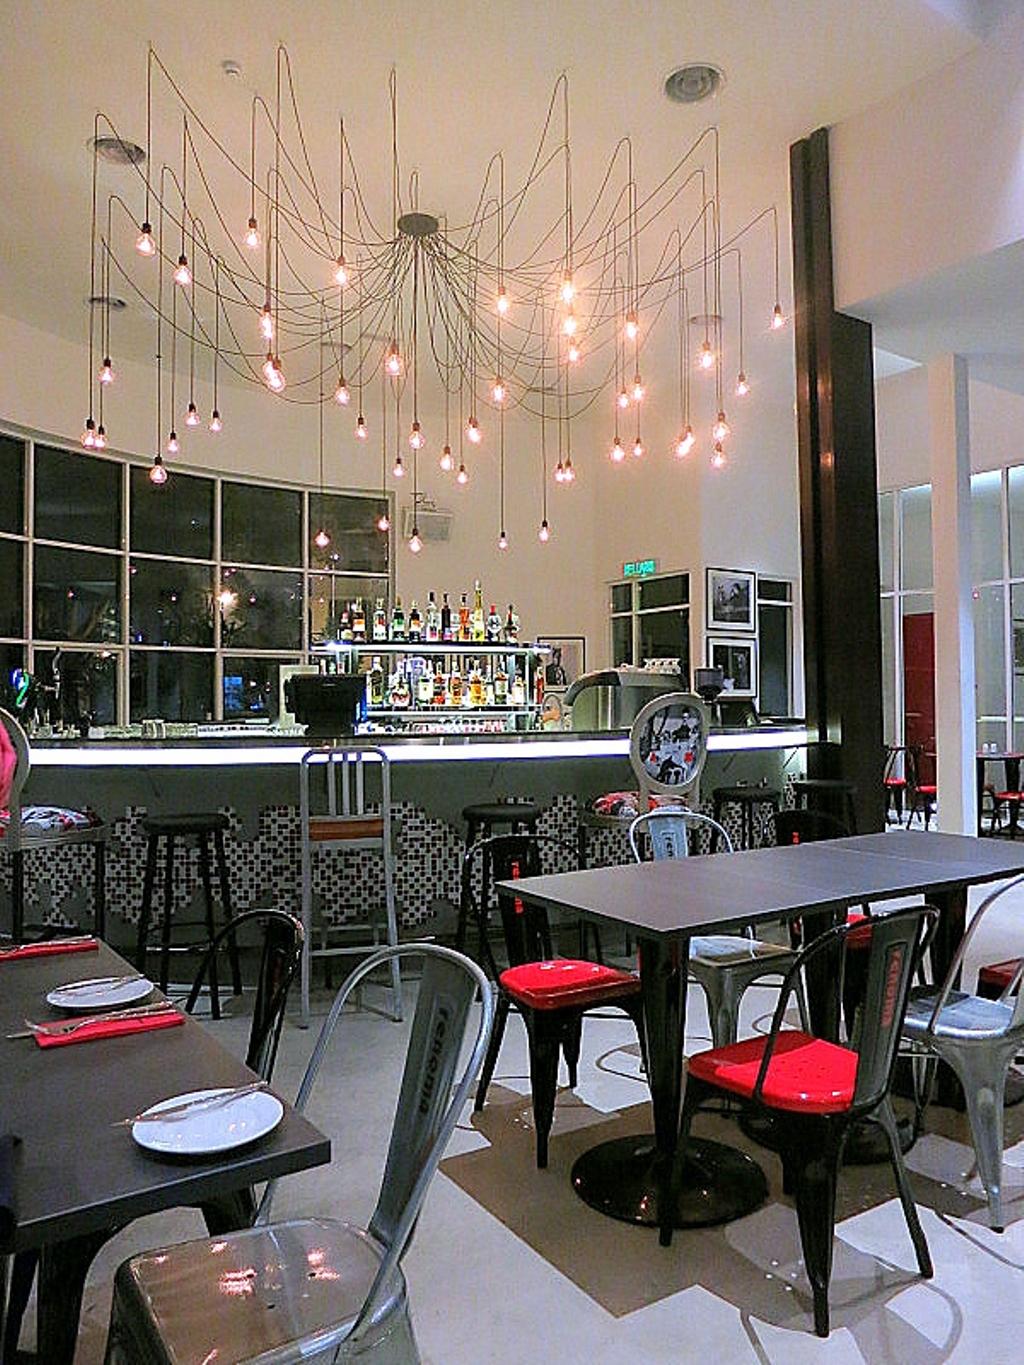 Renoma Cafe KL, Commercial, Architect, Aamer Architects, Contemporary, Red Chair, Hanging Lights, White Ceiling, Bar Counter, Dining Table, High Chair, High Ceiling, White Wall, Black Chair, Glass Window, High Stool, Tall Window, White Floor, High Window, Aluminium Chair, Cafe, Restaurant, Automobile, Car, Transportation, Vehicle